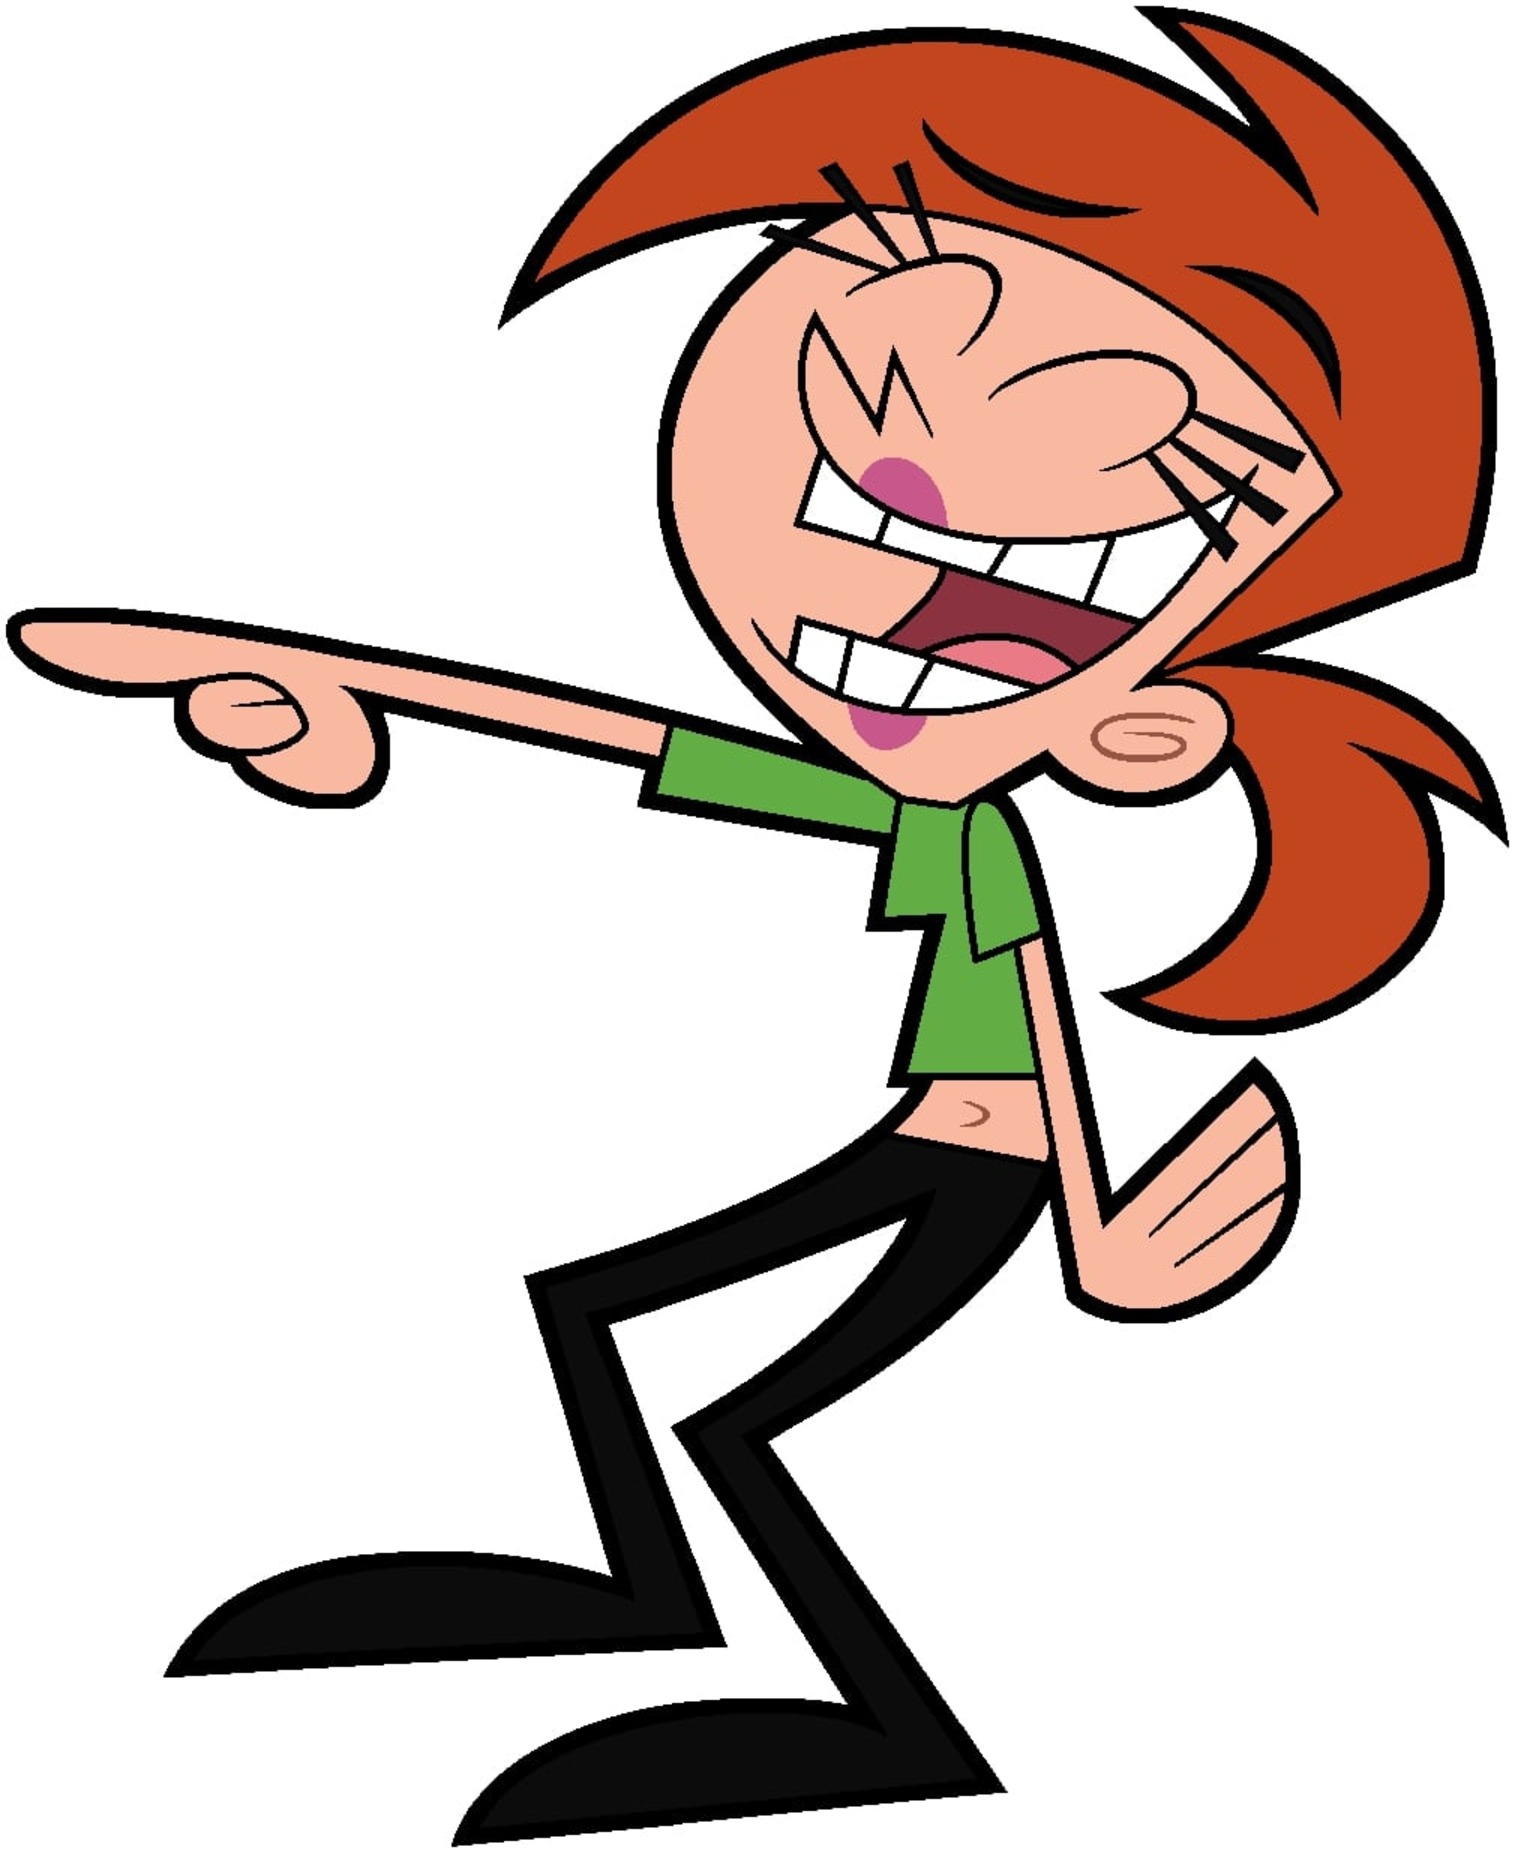 Vicky from Fairly Odd Parents Laughing Blank Meme Template